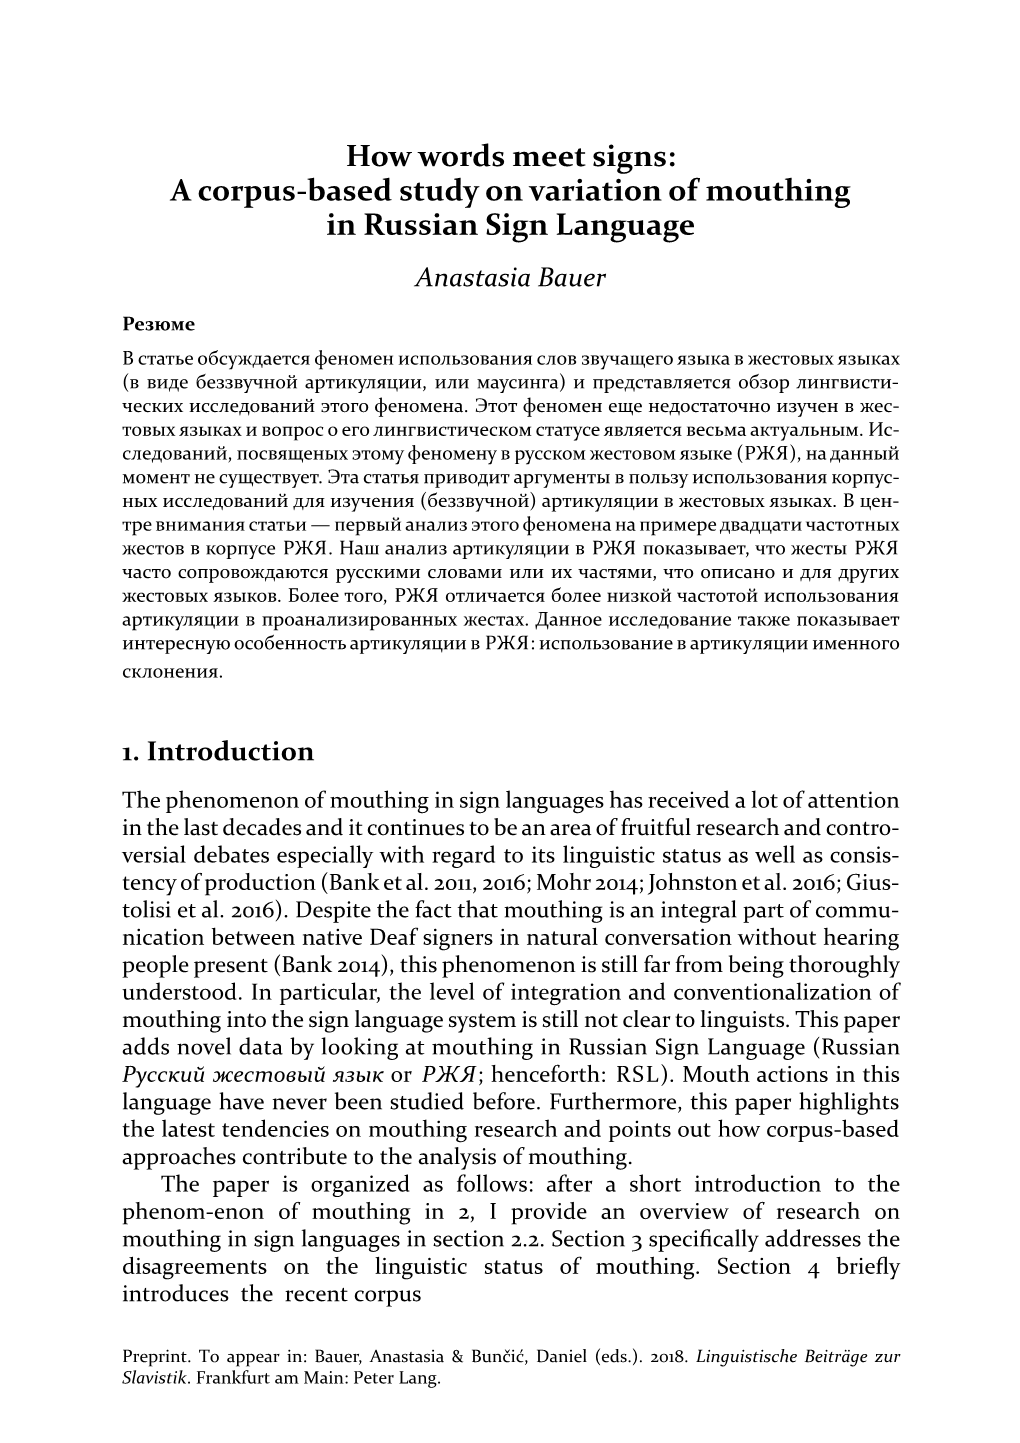 How Words Meet Signs: a Corpus-Based Study on Variation of Mouthing in Russian Sign Language Anastasia Bauer